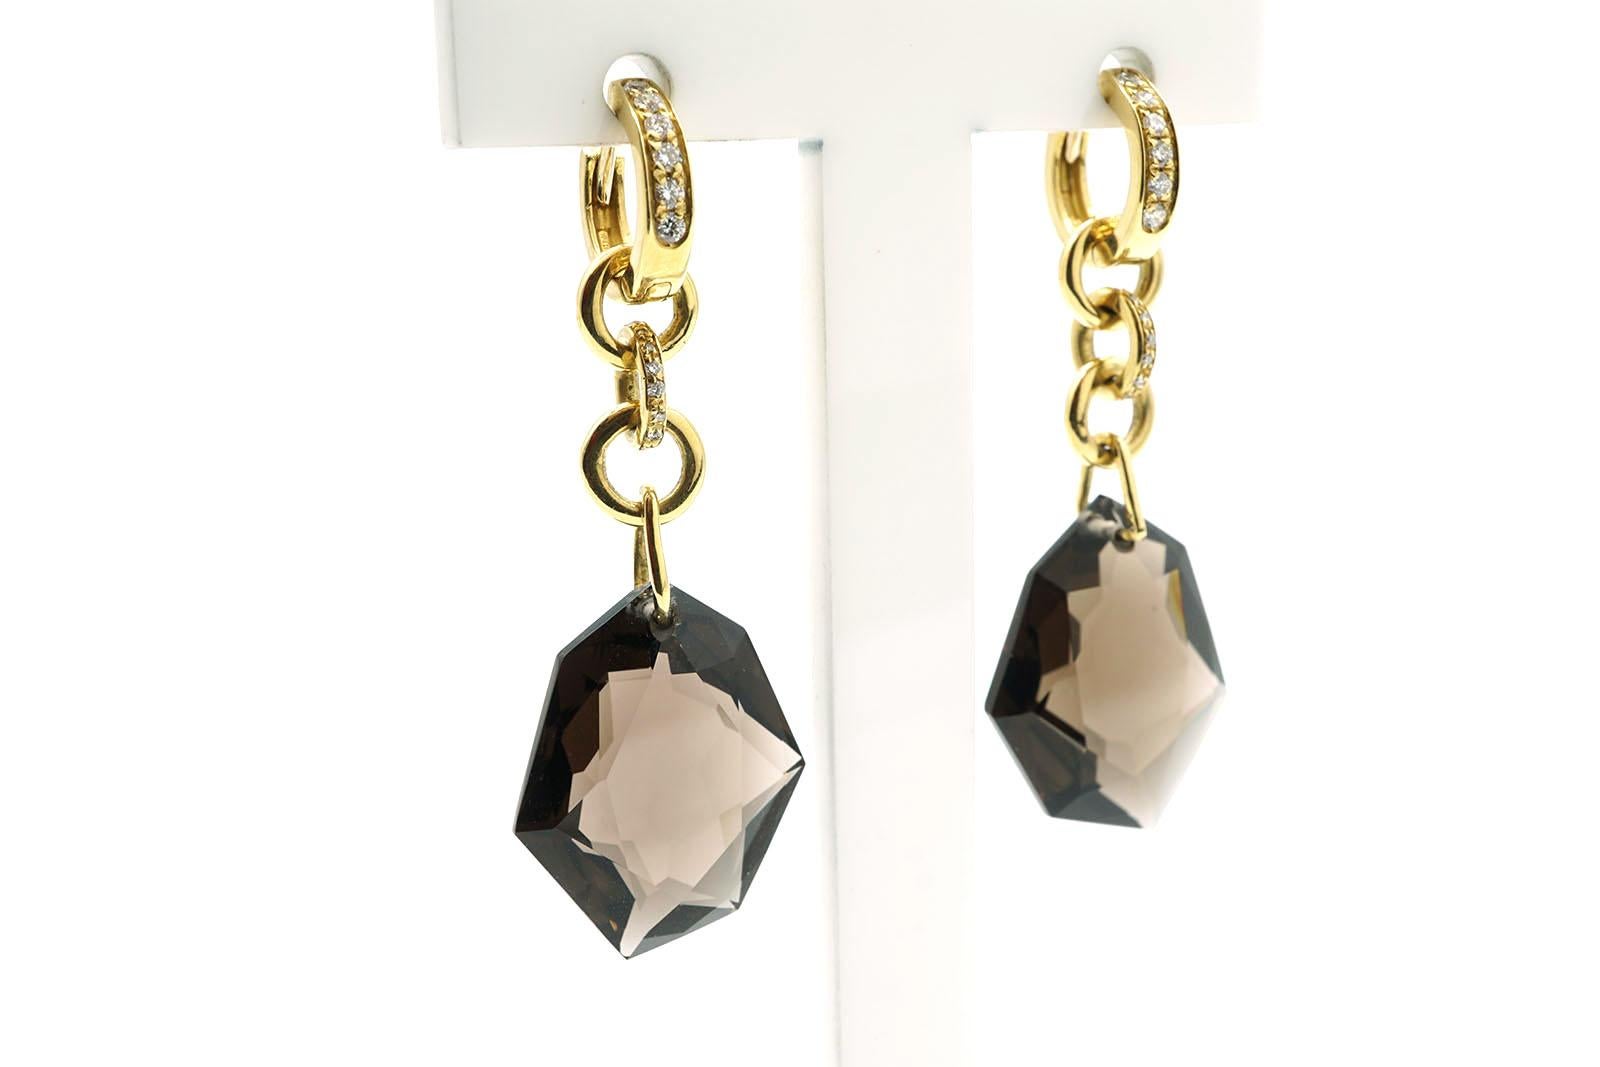 Chandelier earrings made in 18 Kt yellow gold, diamonds and two fume quartz. drops.
The drops has a bright irregular faceted cut.
These earrings has diamonds settled in the hoop part at the top and they can be worn in two different ways.
You can